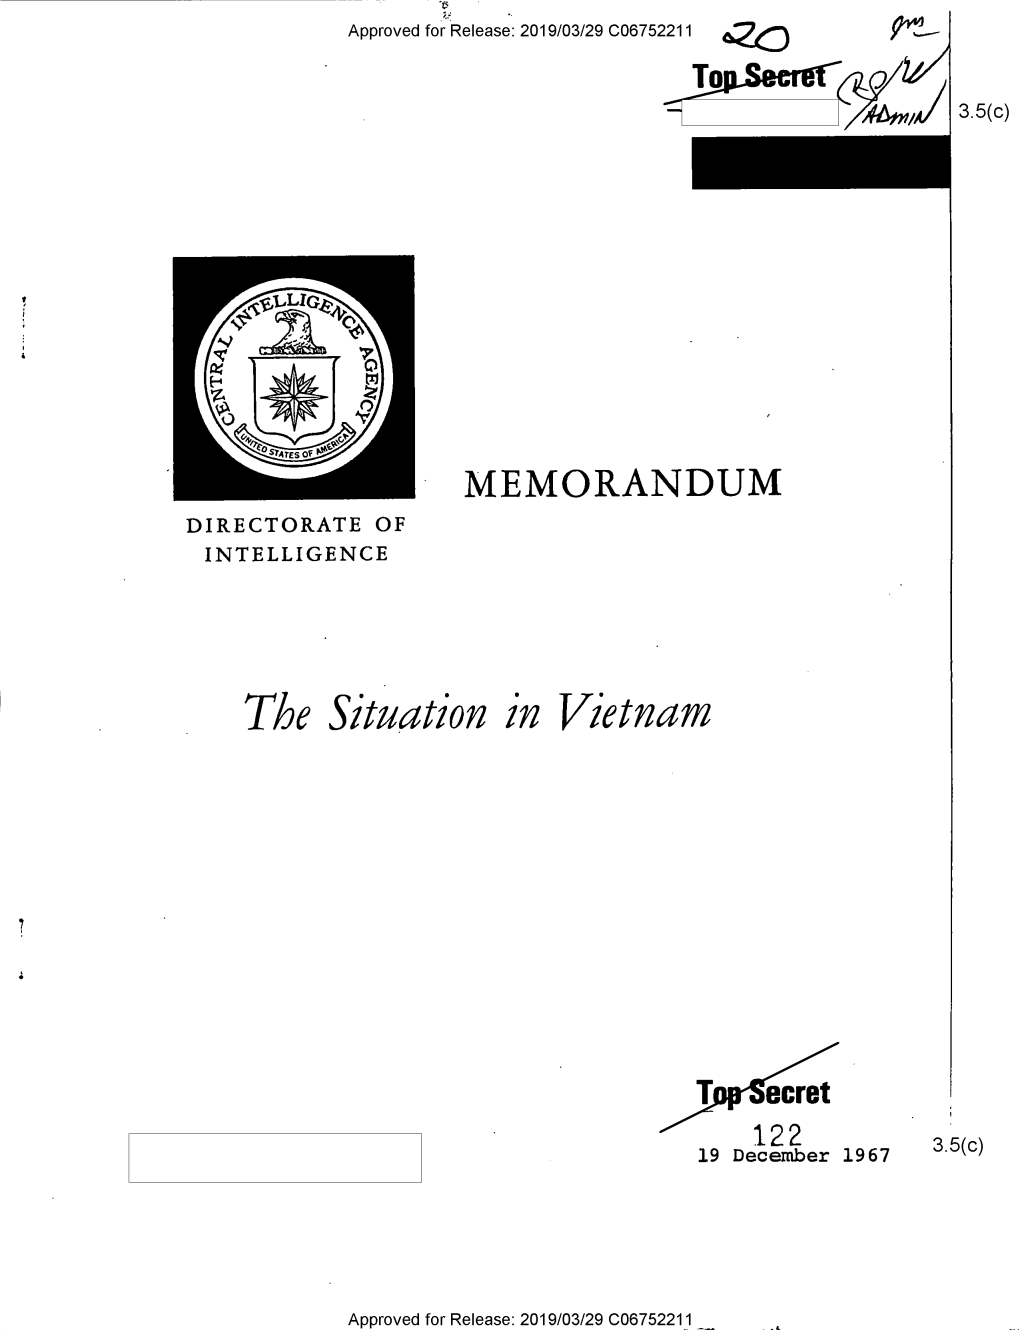 Report on the Situation in Vietnam, 19 December 1967